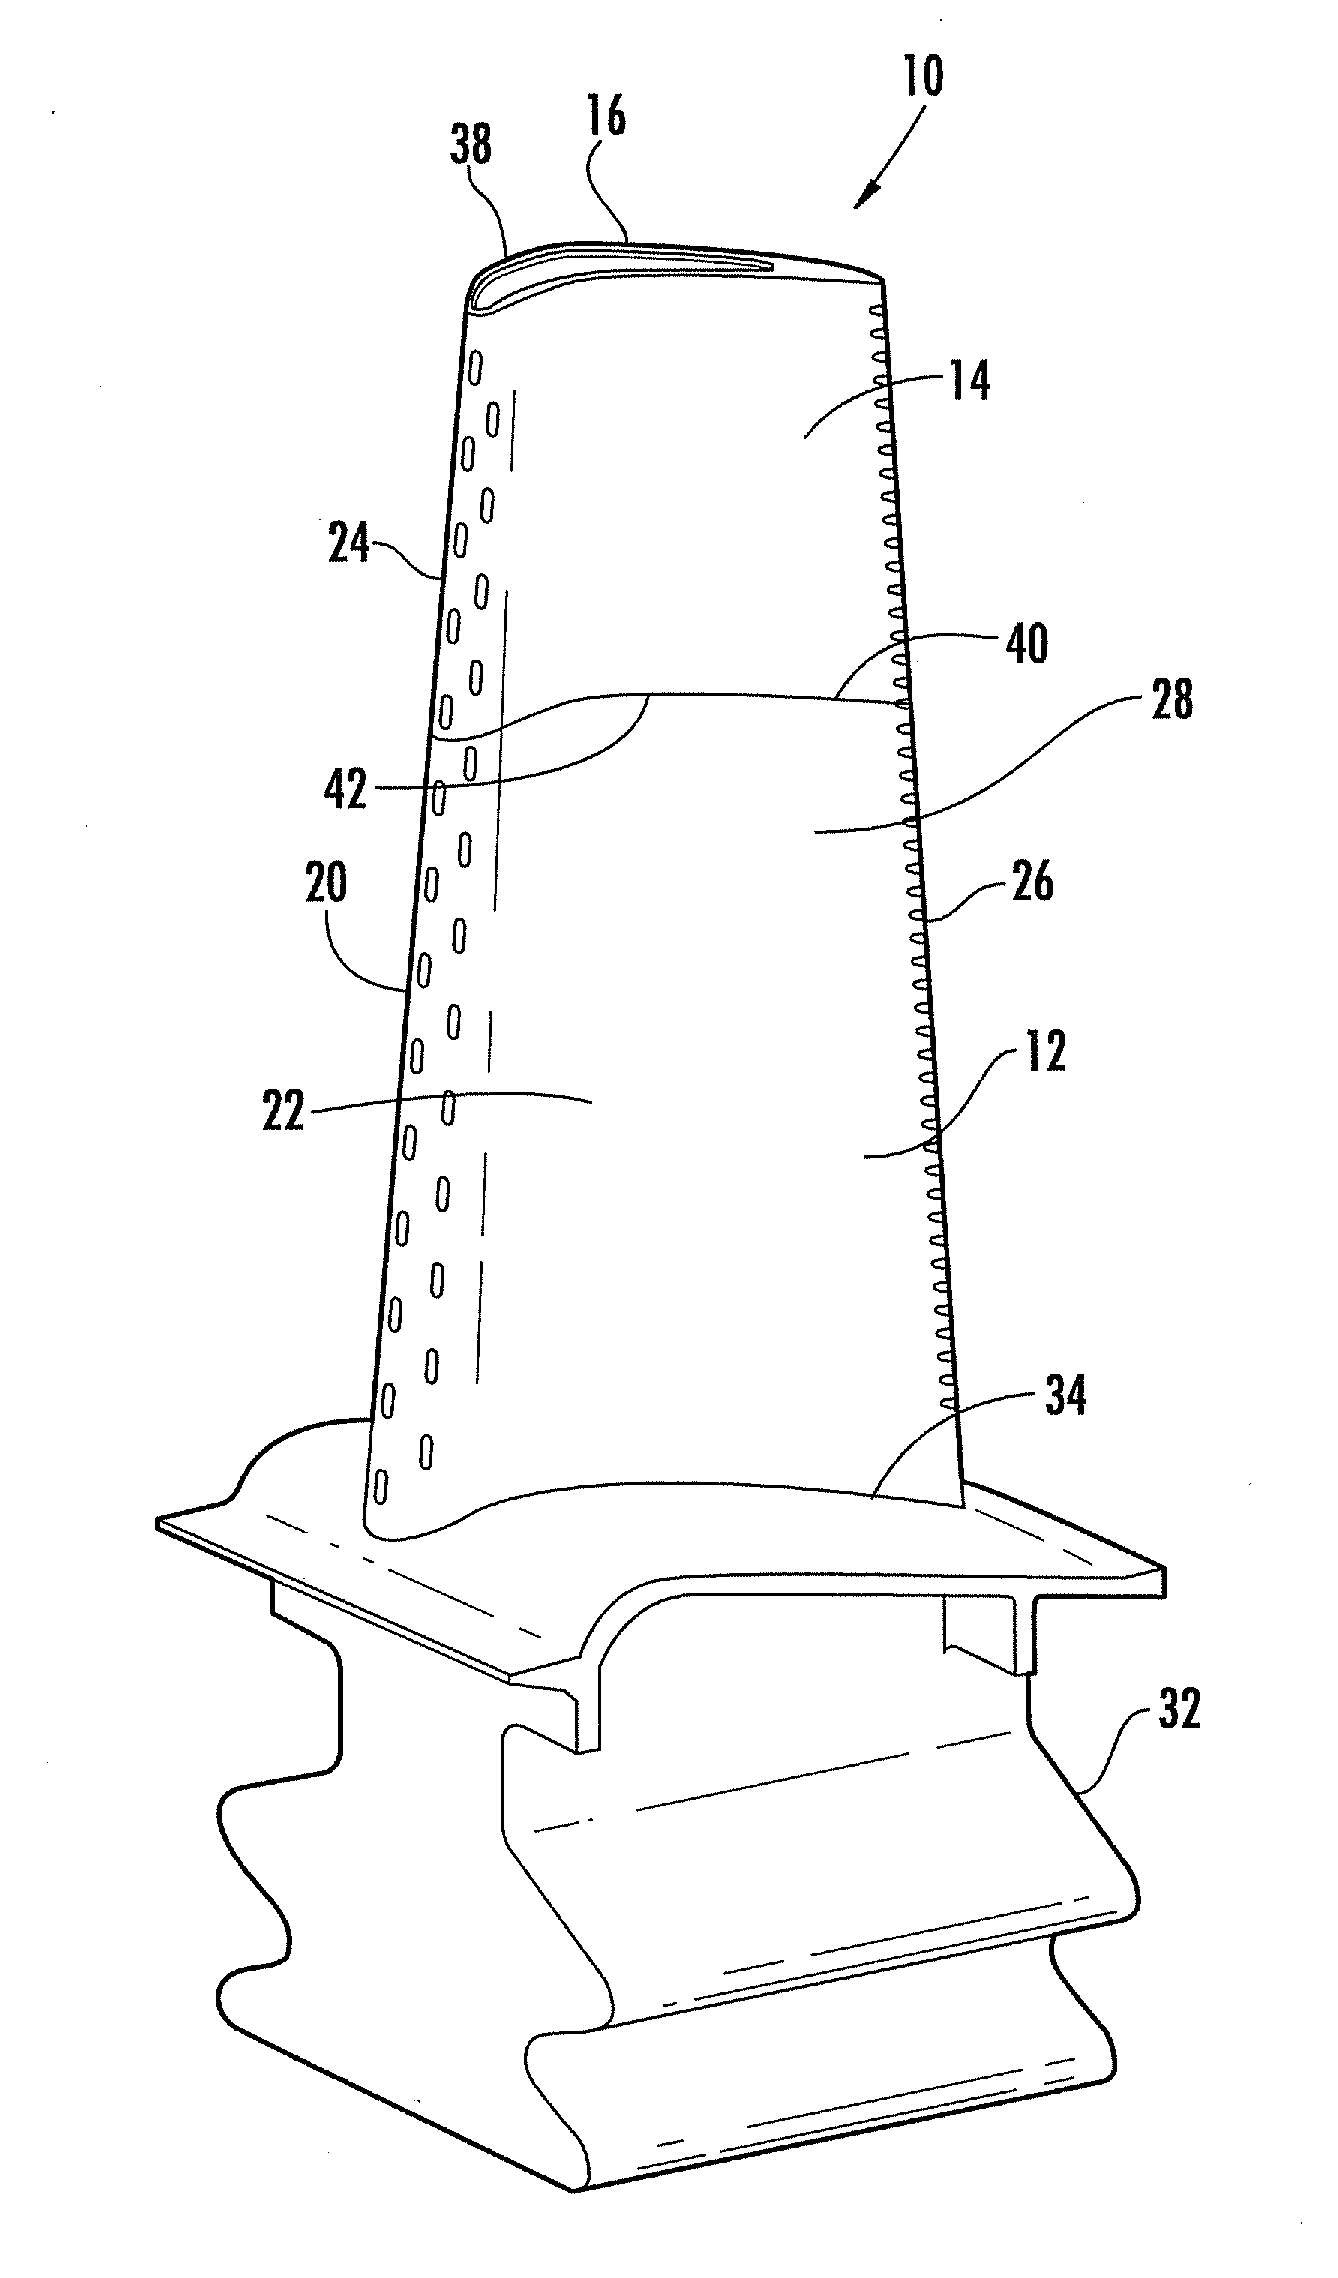 Turbine airfoil having outboard and inboard sections